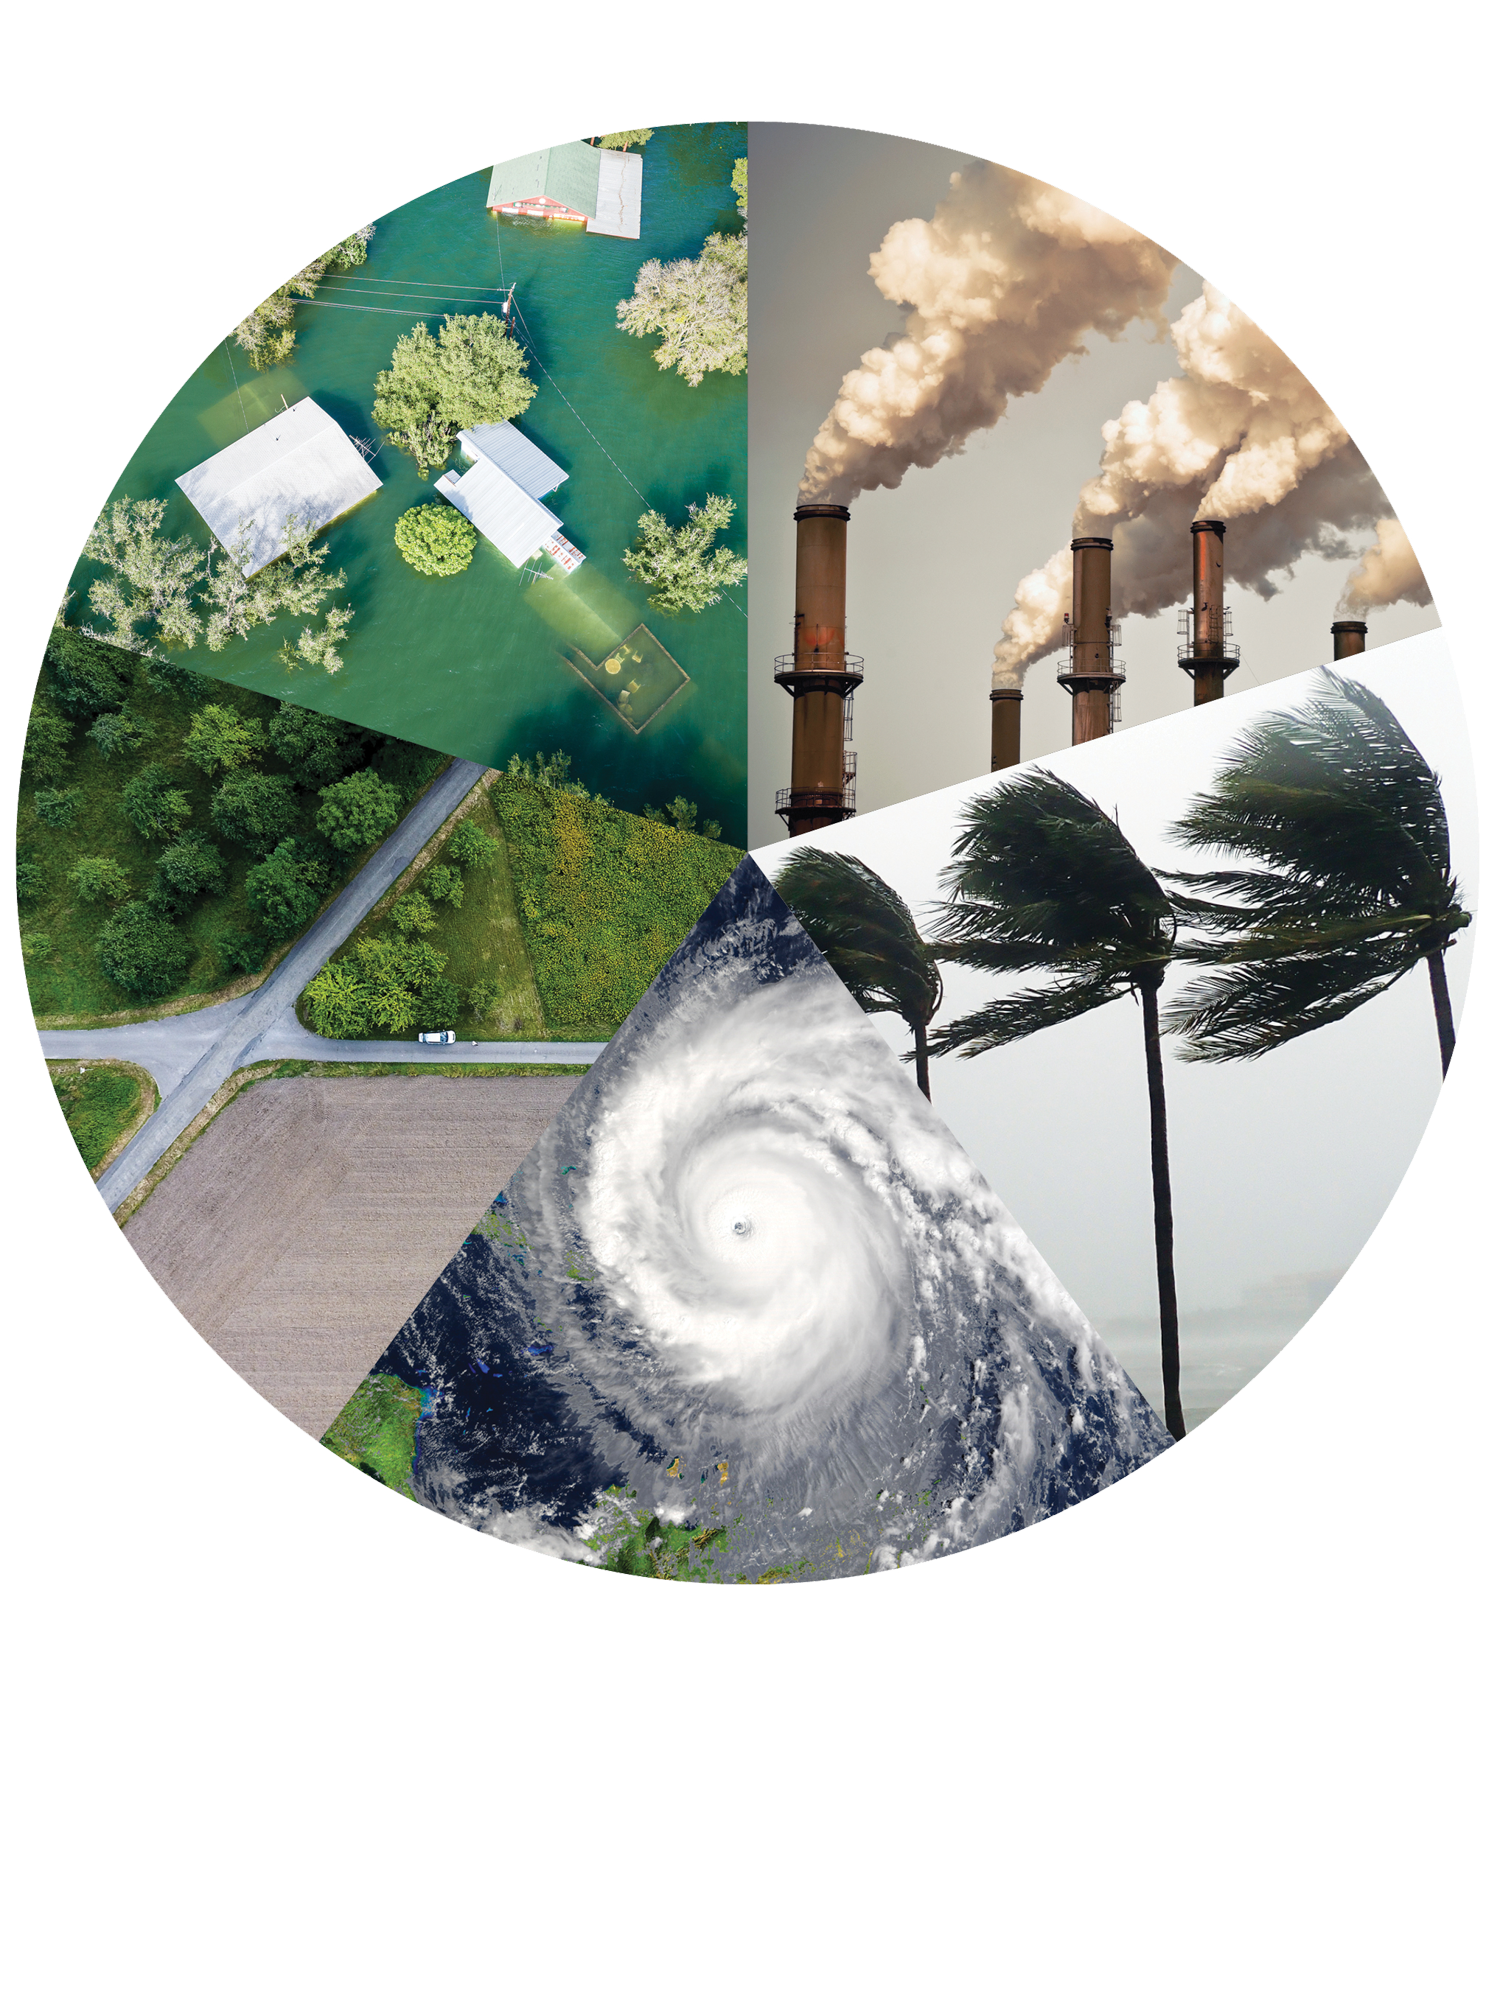 composite pie graph shaped image of weather events